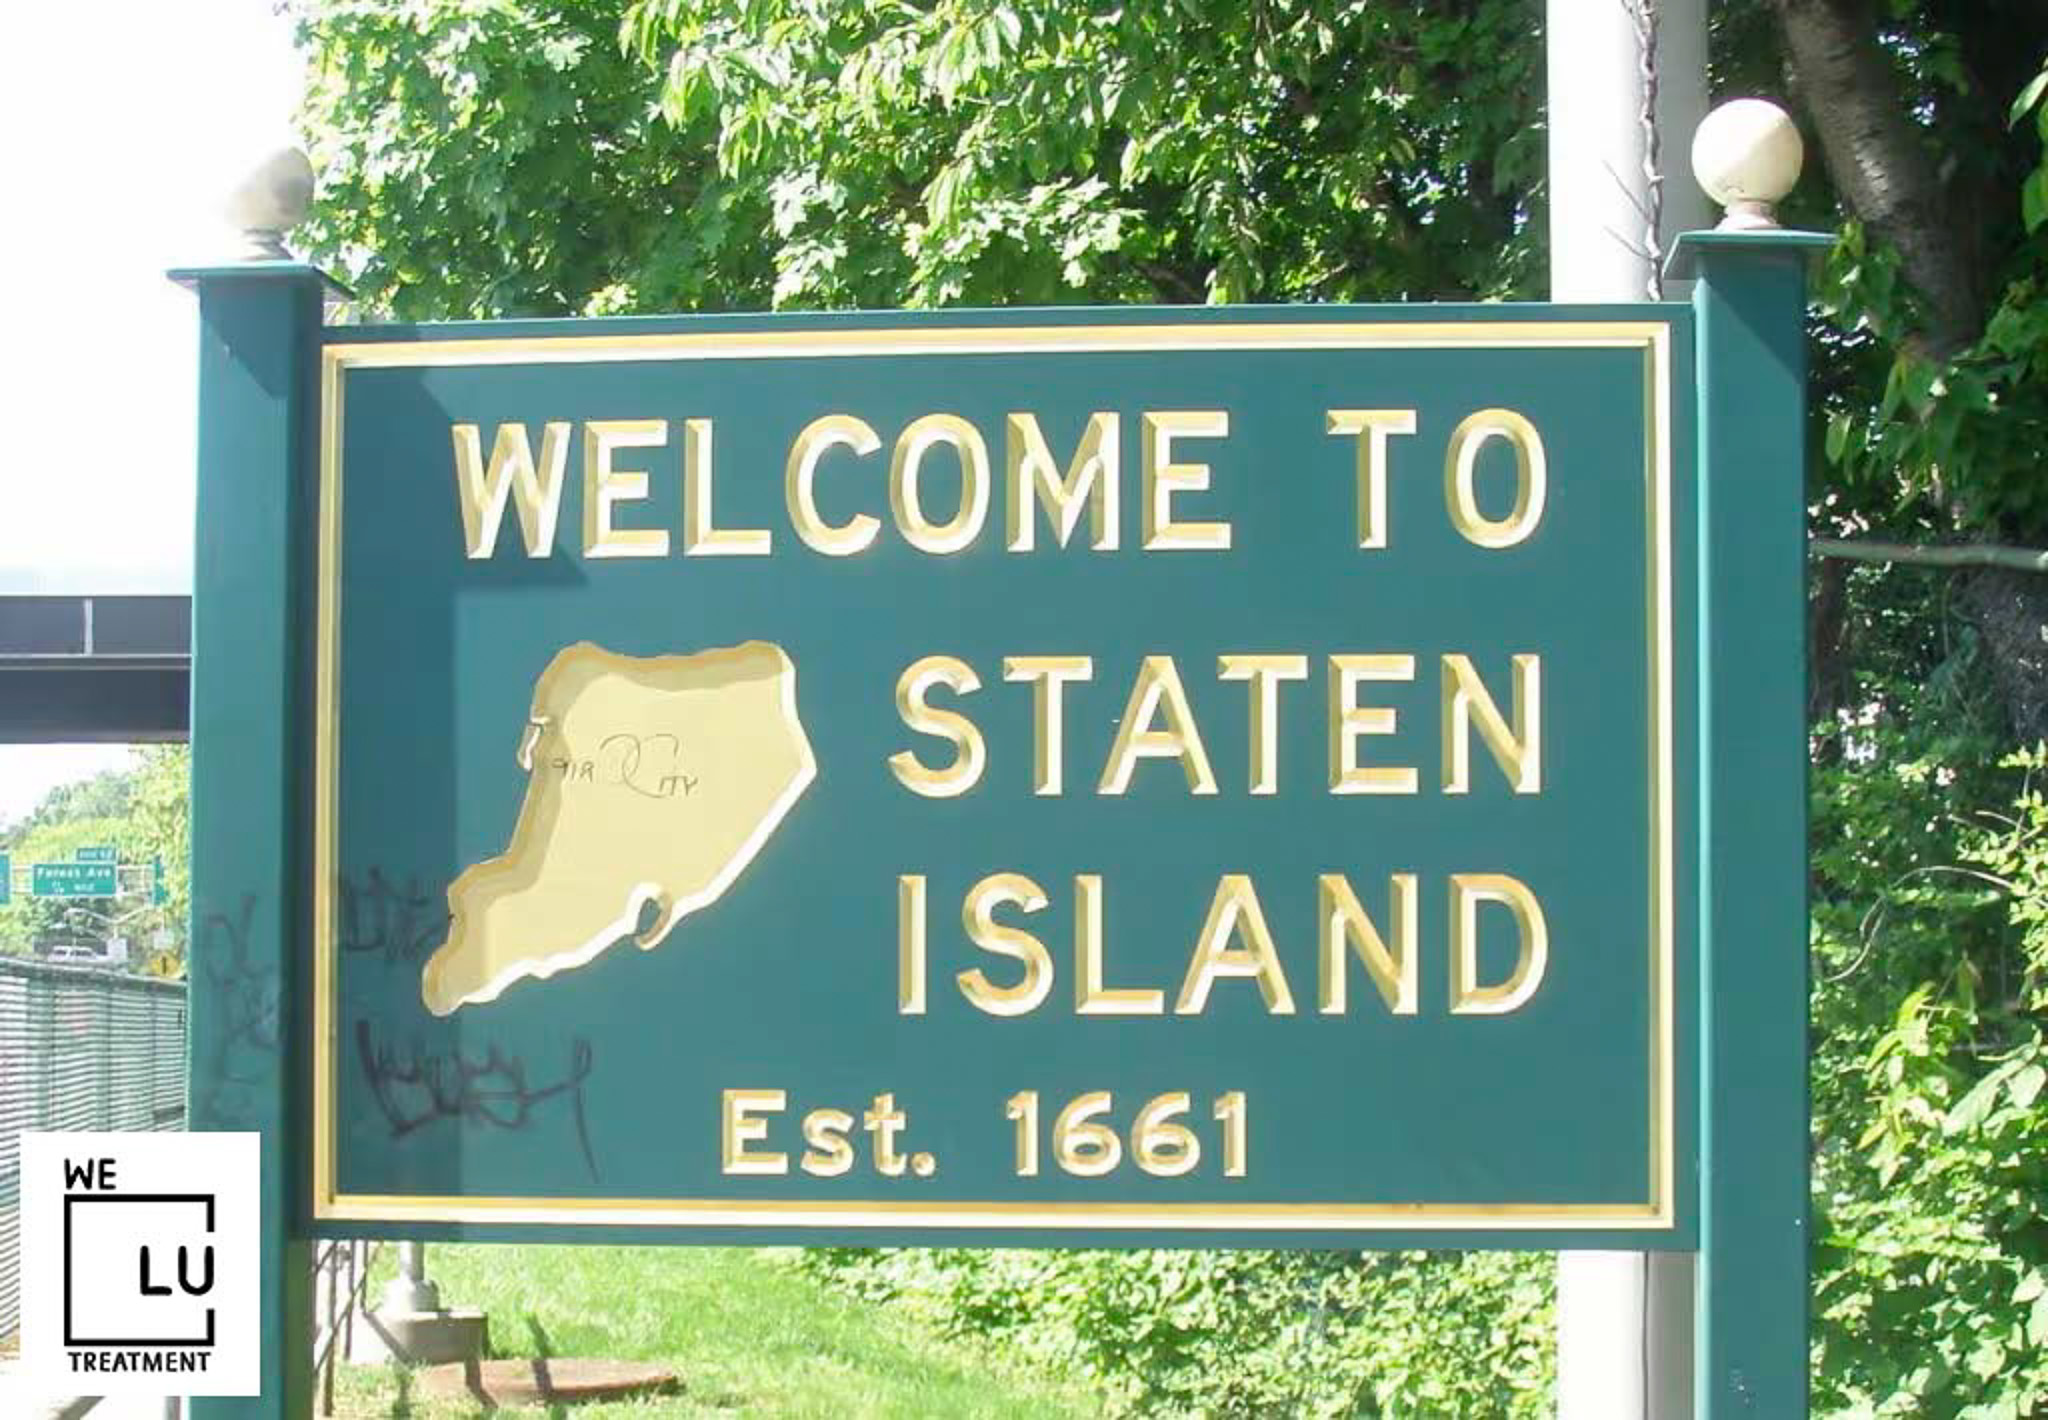 Staten Island NY We Level Up treatment center for drug and alcohol rehab detox and mental health services - Image 1